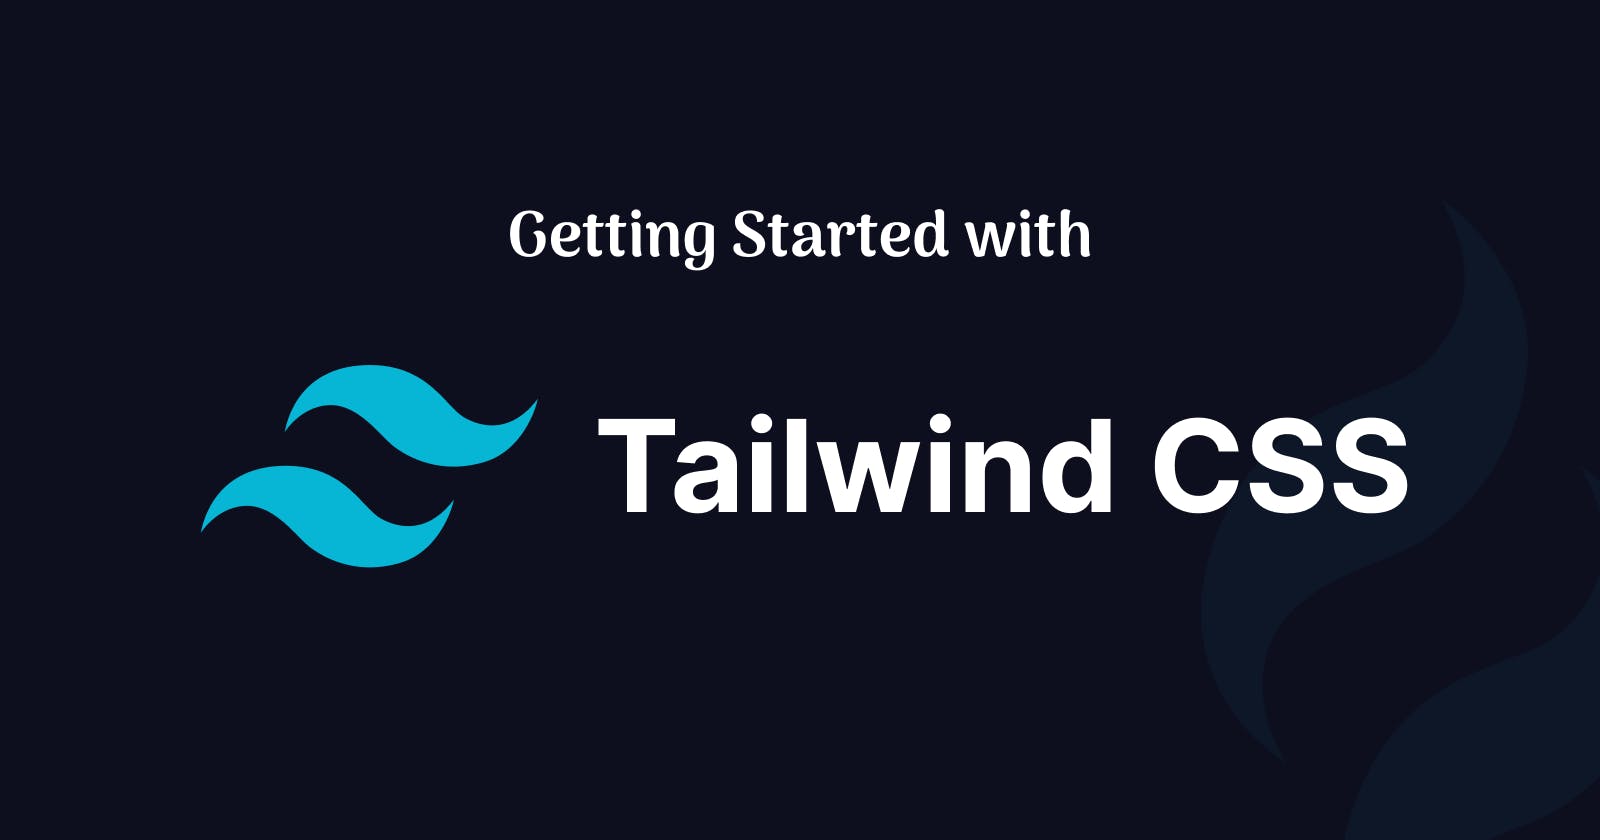 Getting Started with Tailwind CSS